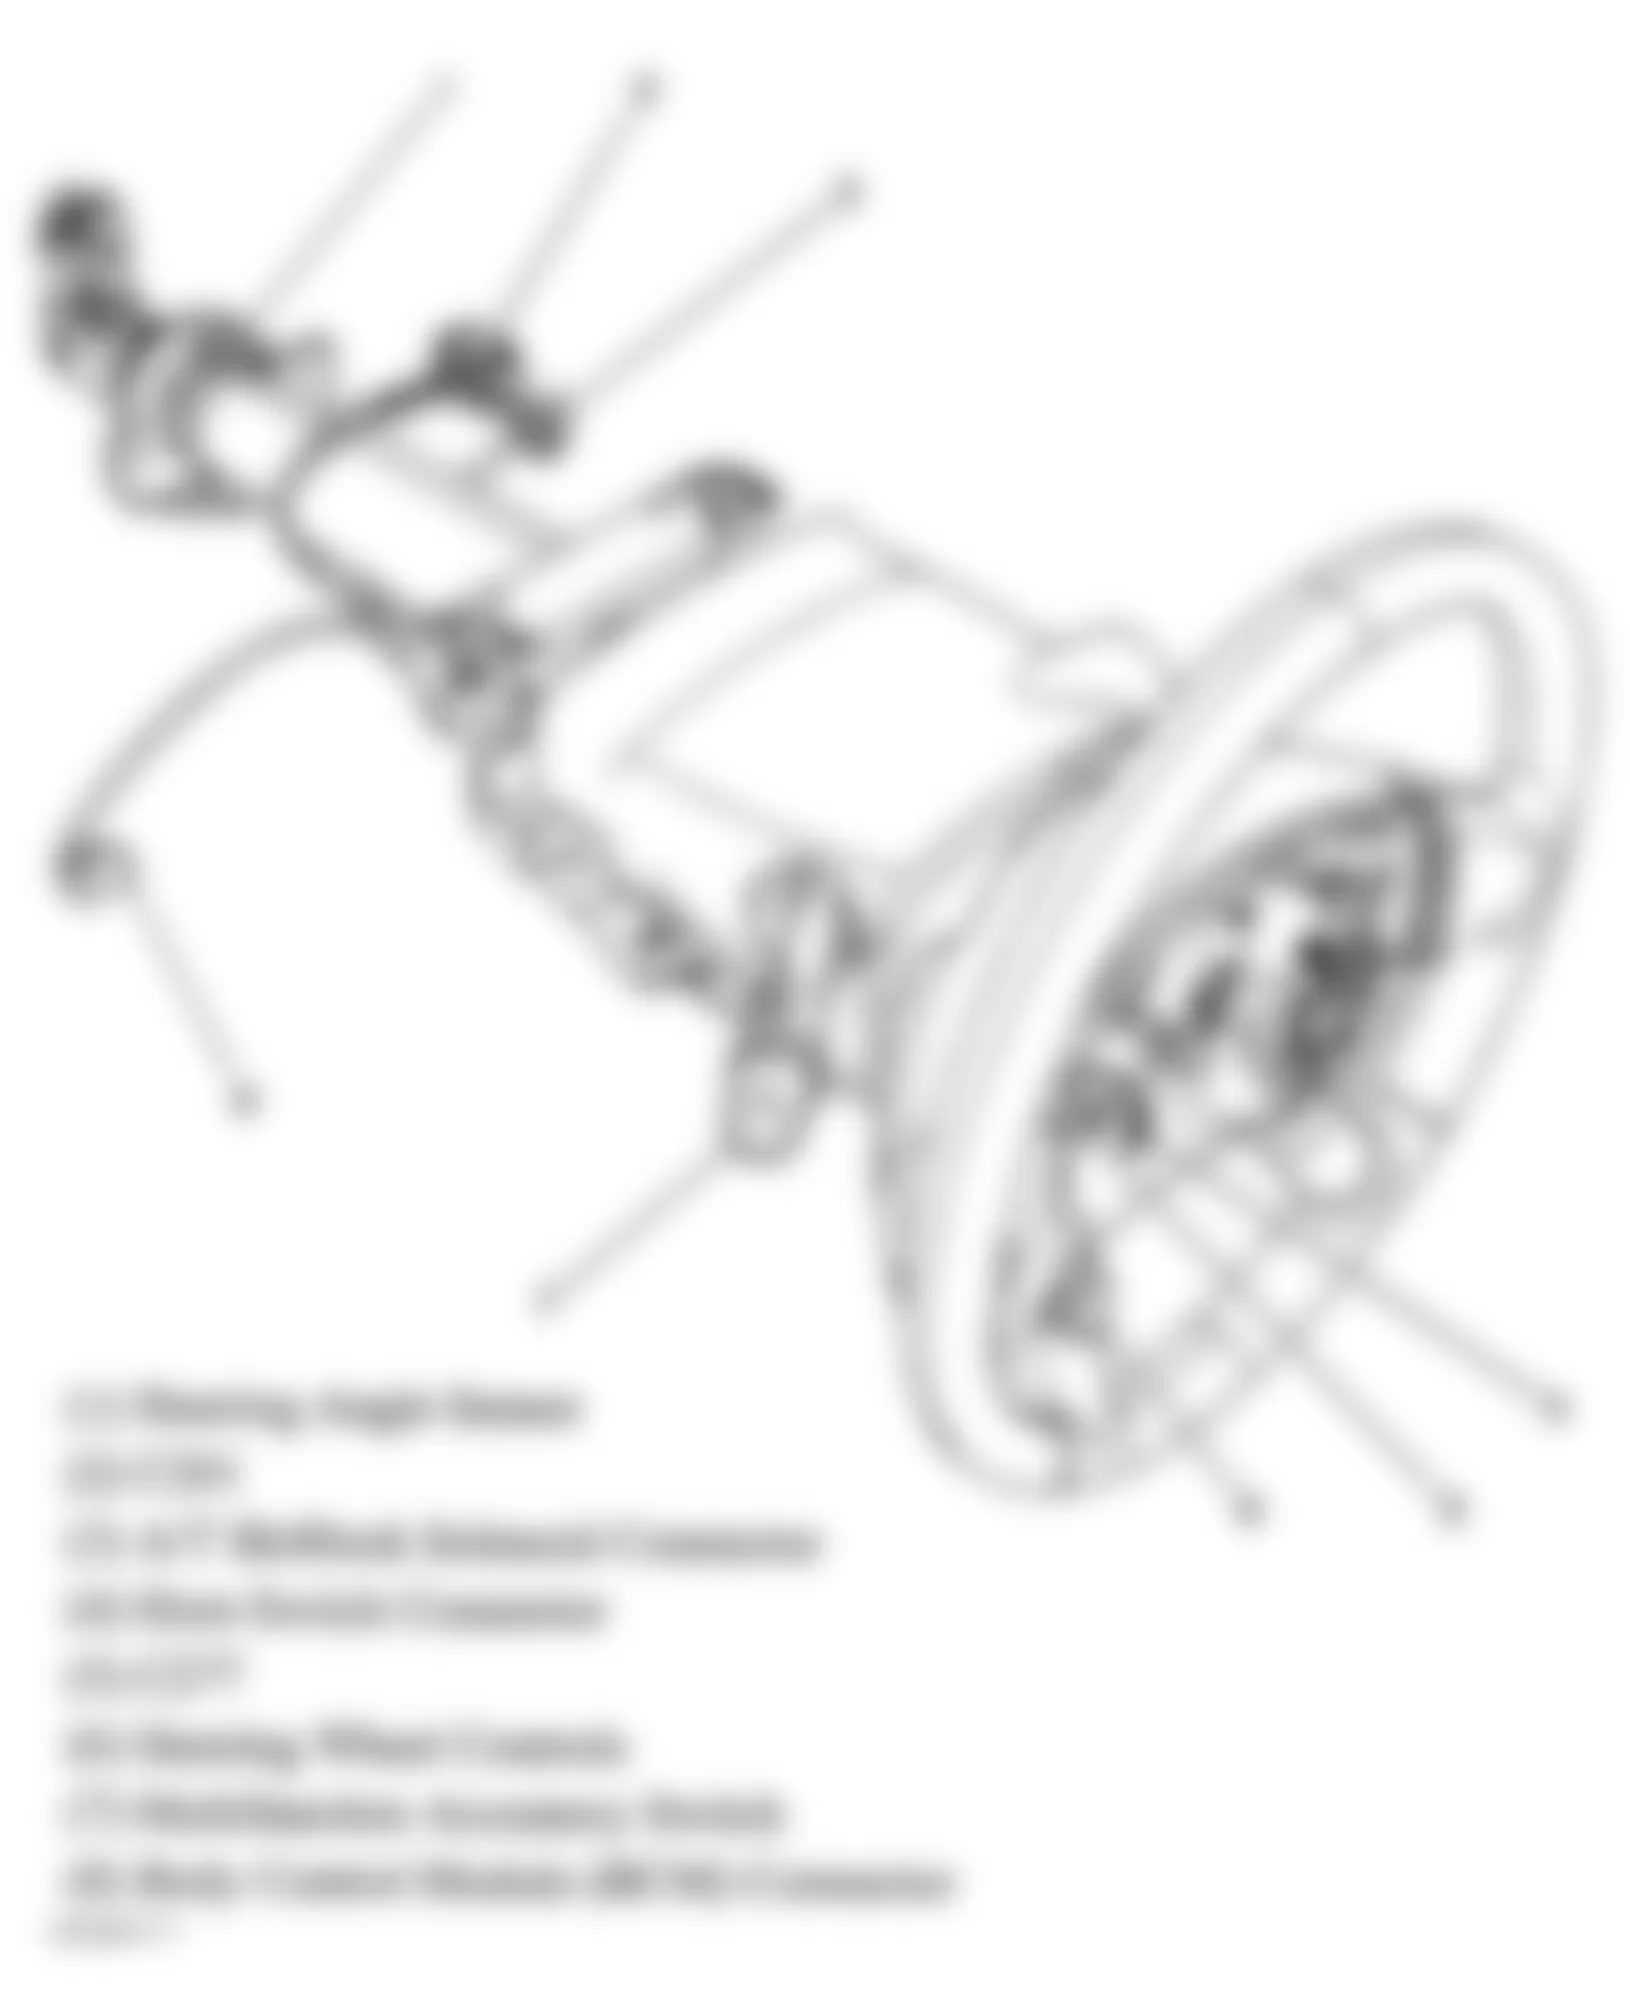 Buick Allure CXS 2005 - Component Locations -  Steering Column